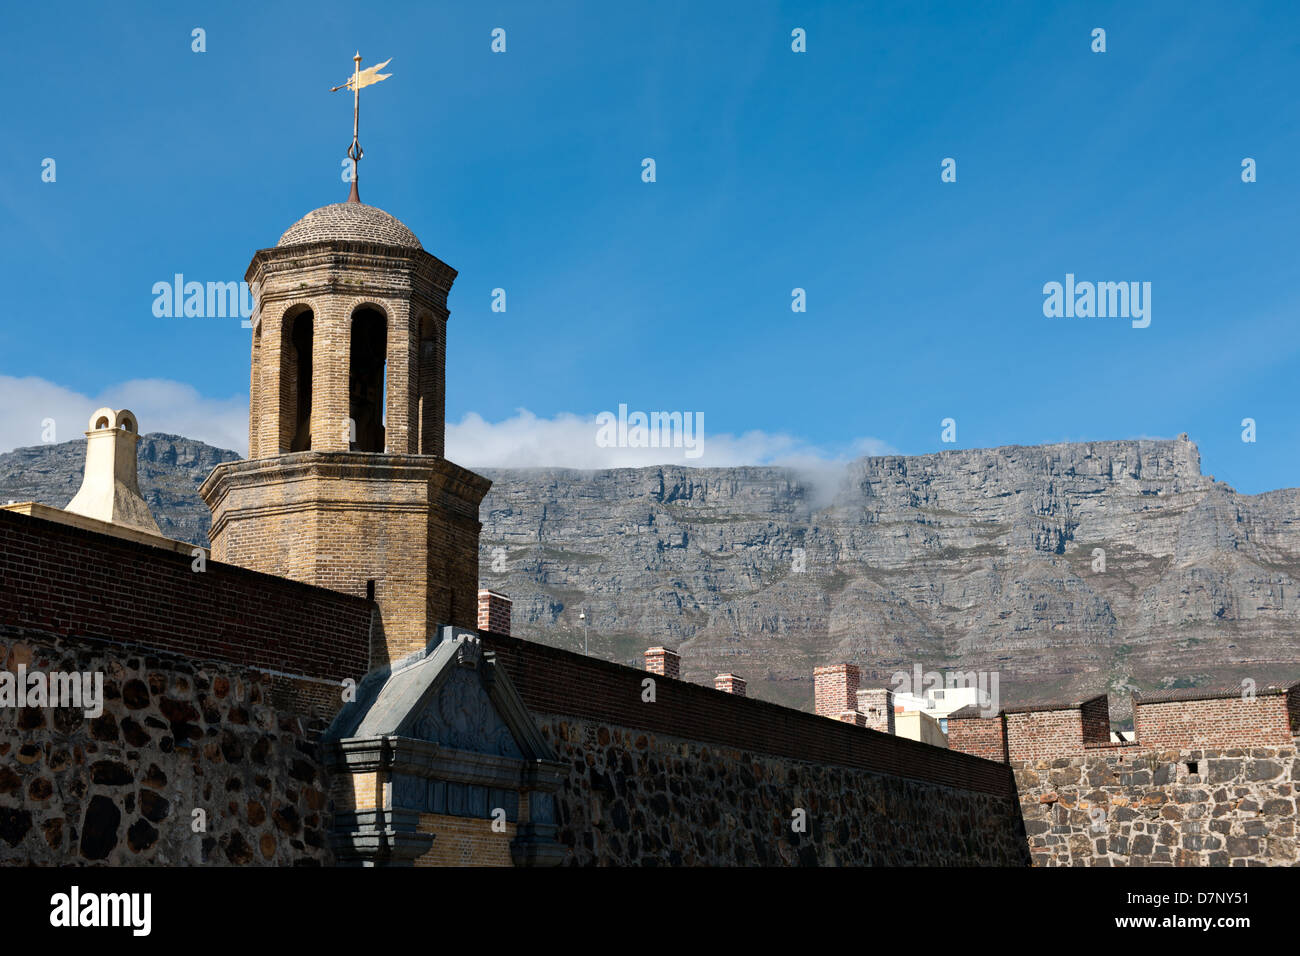 Bell tower at the main entrance, Castle of Good Hope, Cape Town, South Africa Stock Photo